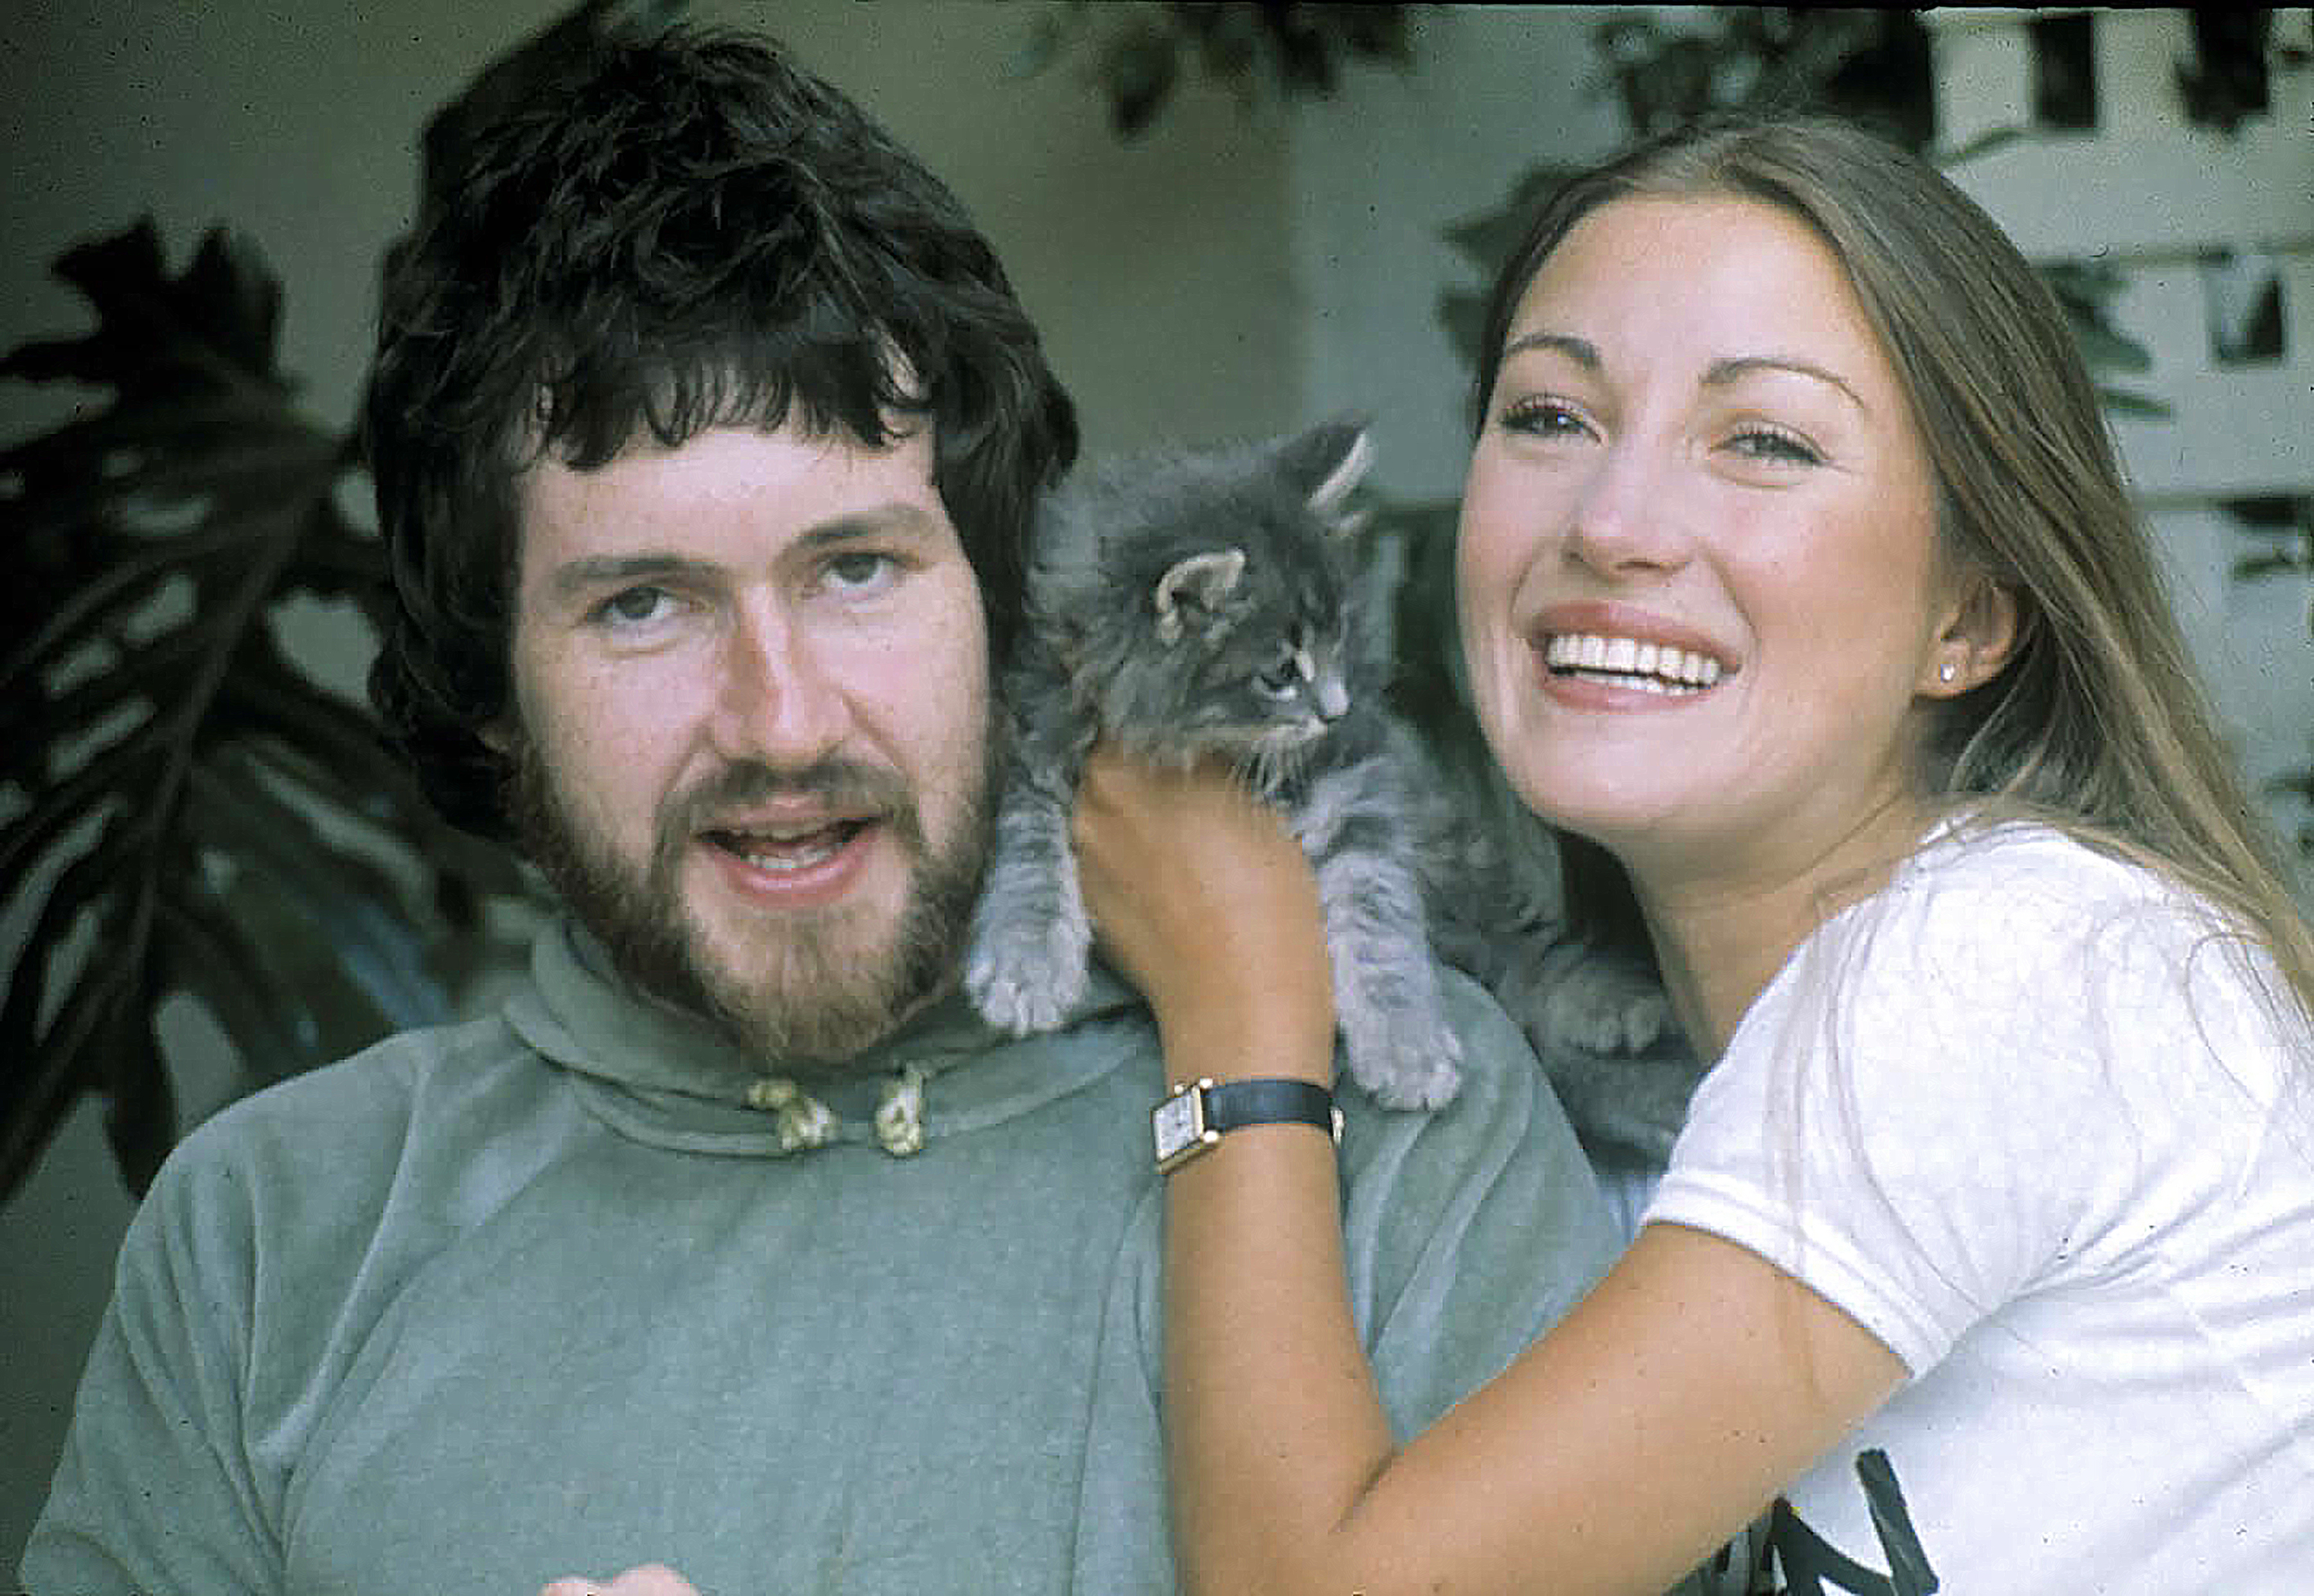 Geoffrey Planer and Jane Seymour at their Hollywood Hills home in 1977 in Los Angeles, California. | Source: Getty Images